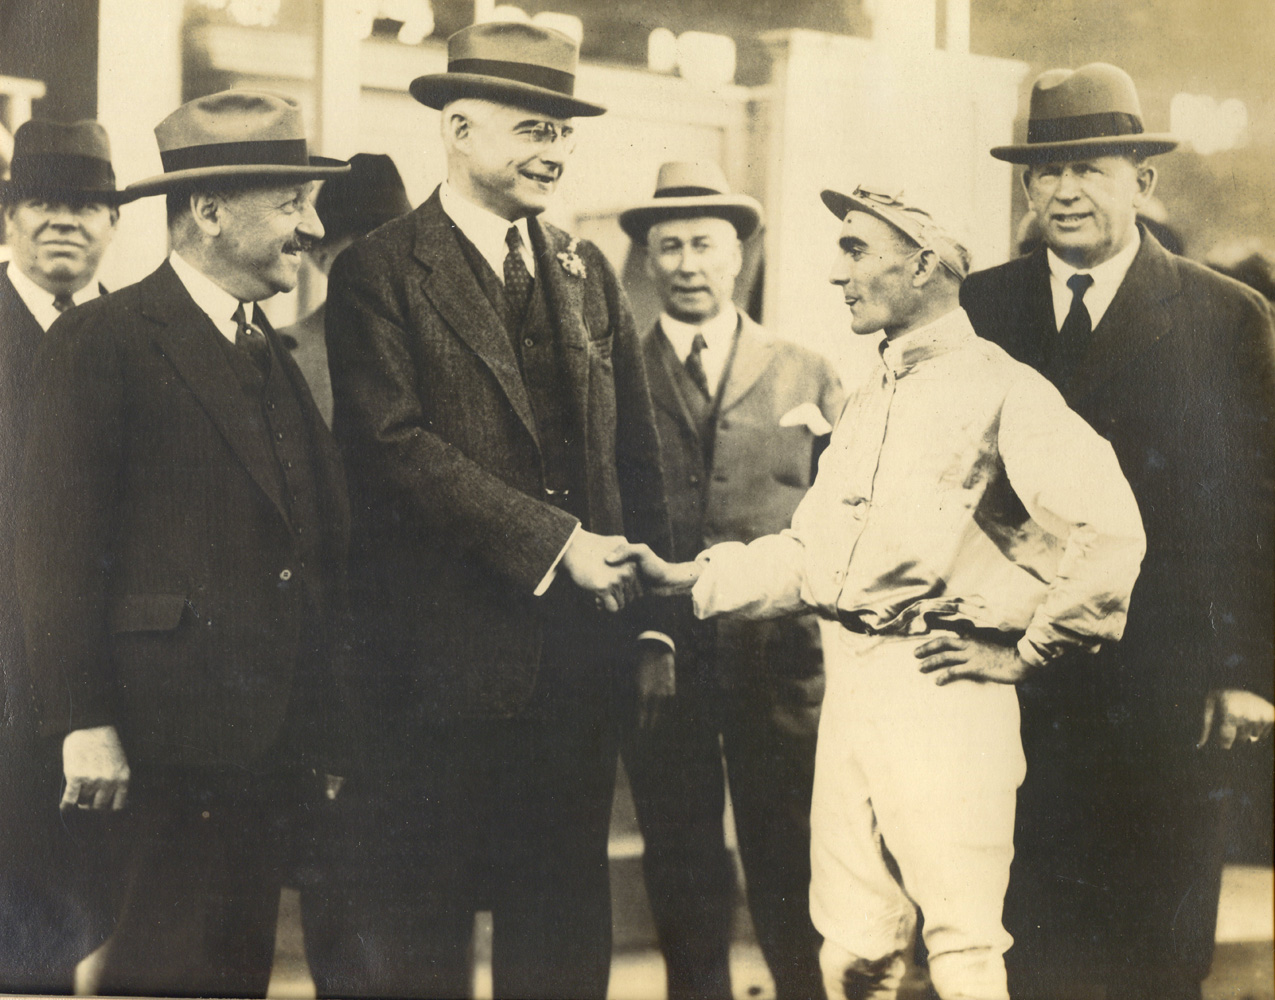 Owner Walter J. Salmon, Maryland Governor Albert Ritchie, jockey John Maiben, and trainer T. J. Healey celebrating their 1926 Preakness victory with Display (Drucker and Company/Museum Collection)